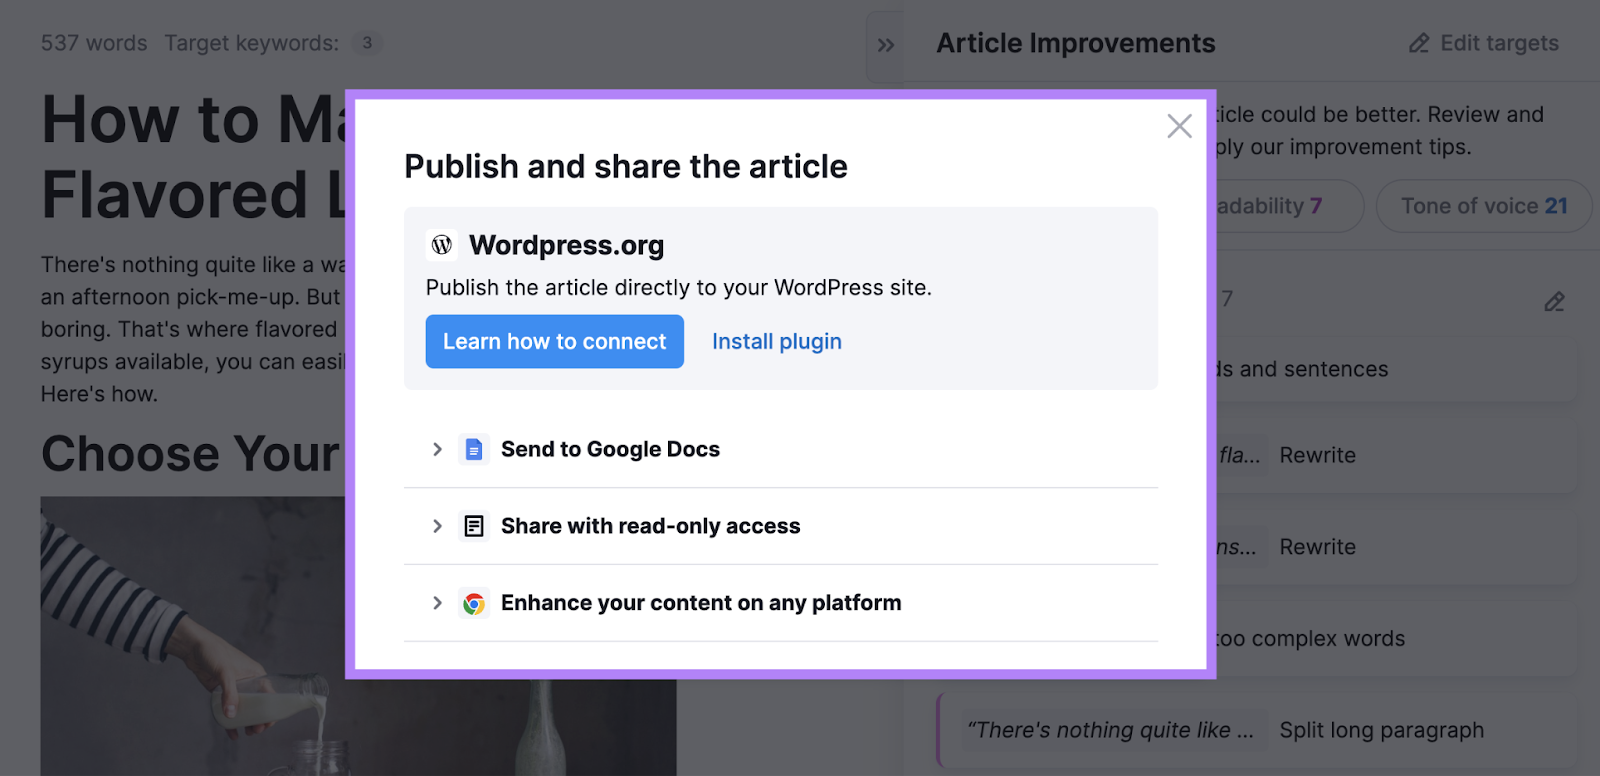 "Publish and share the article" pop-up window in ContentShake AI